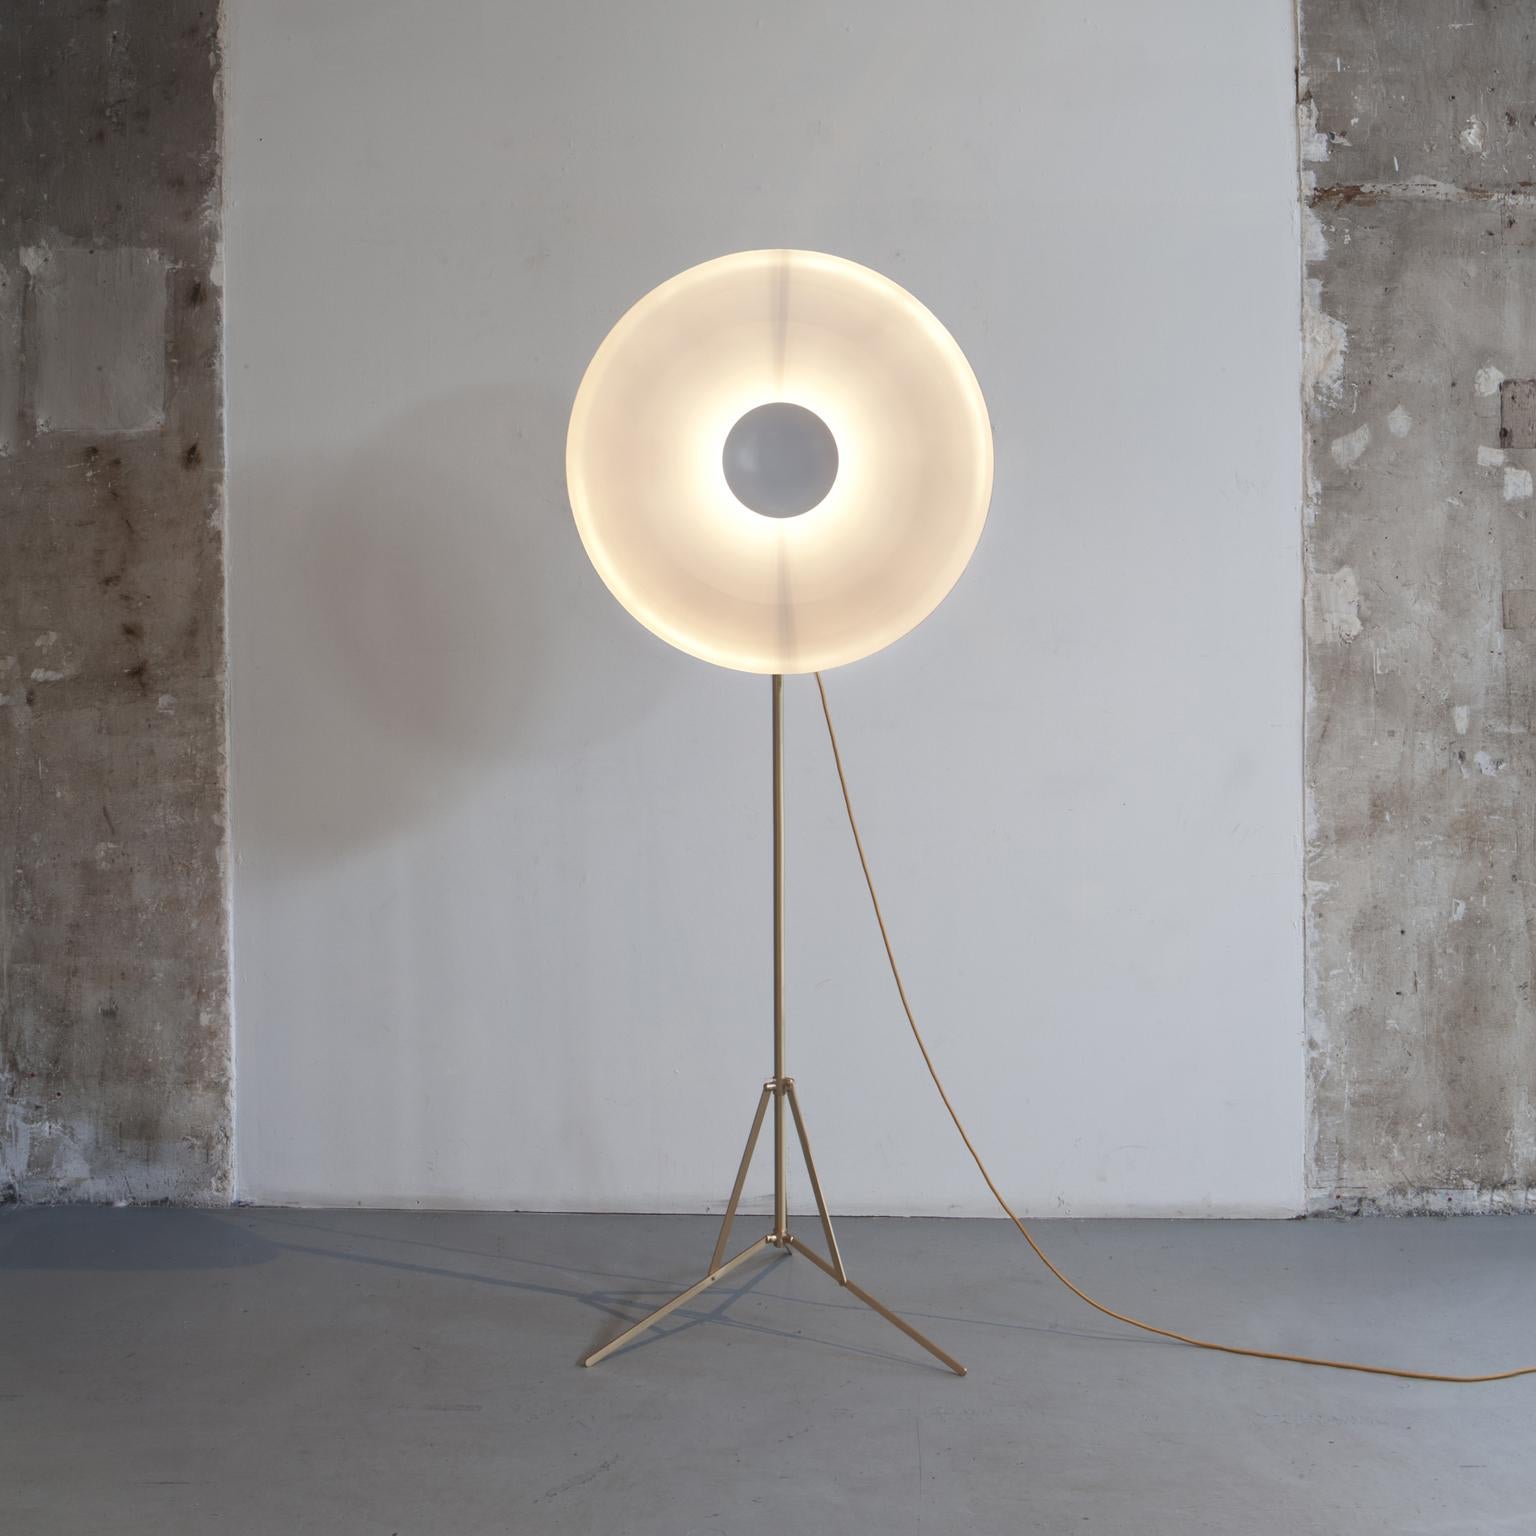 Italian Parabola Copper Floor Lamp and White Disk, Atelier Biagetti